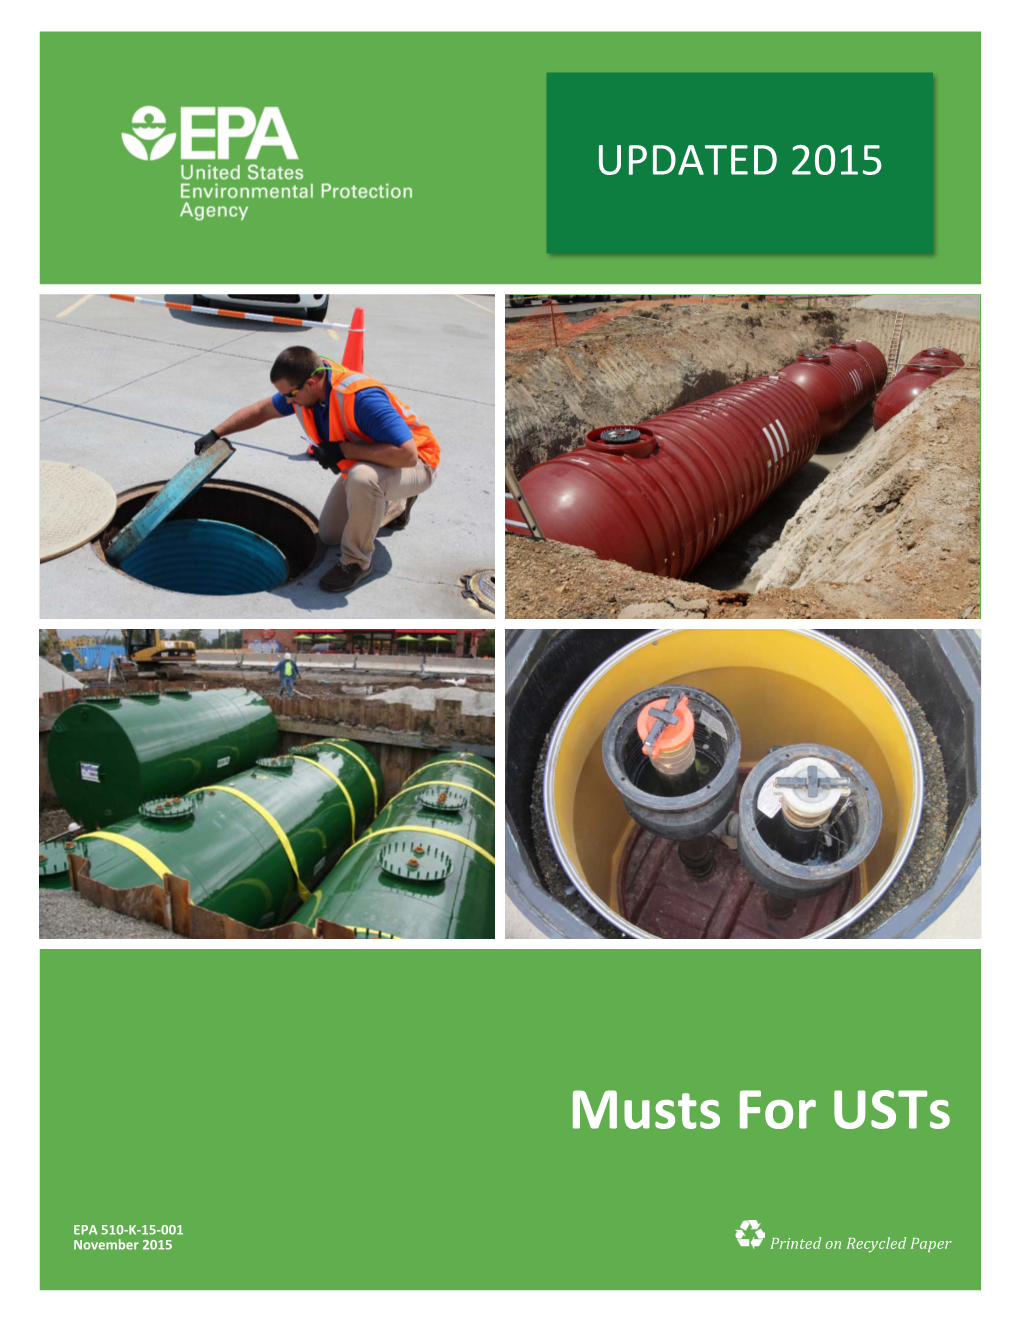 2015 Musts for Usts